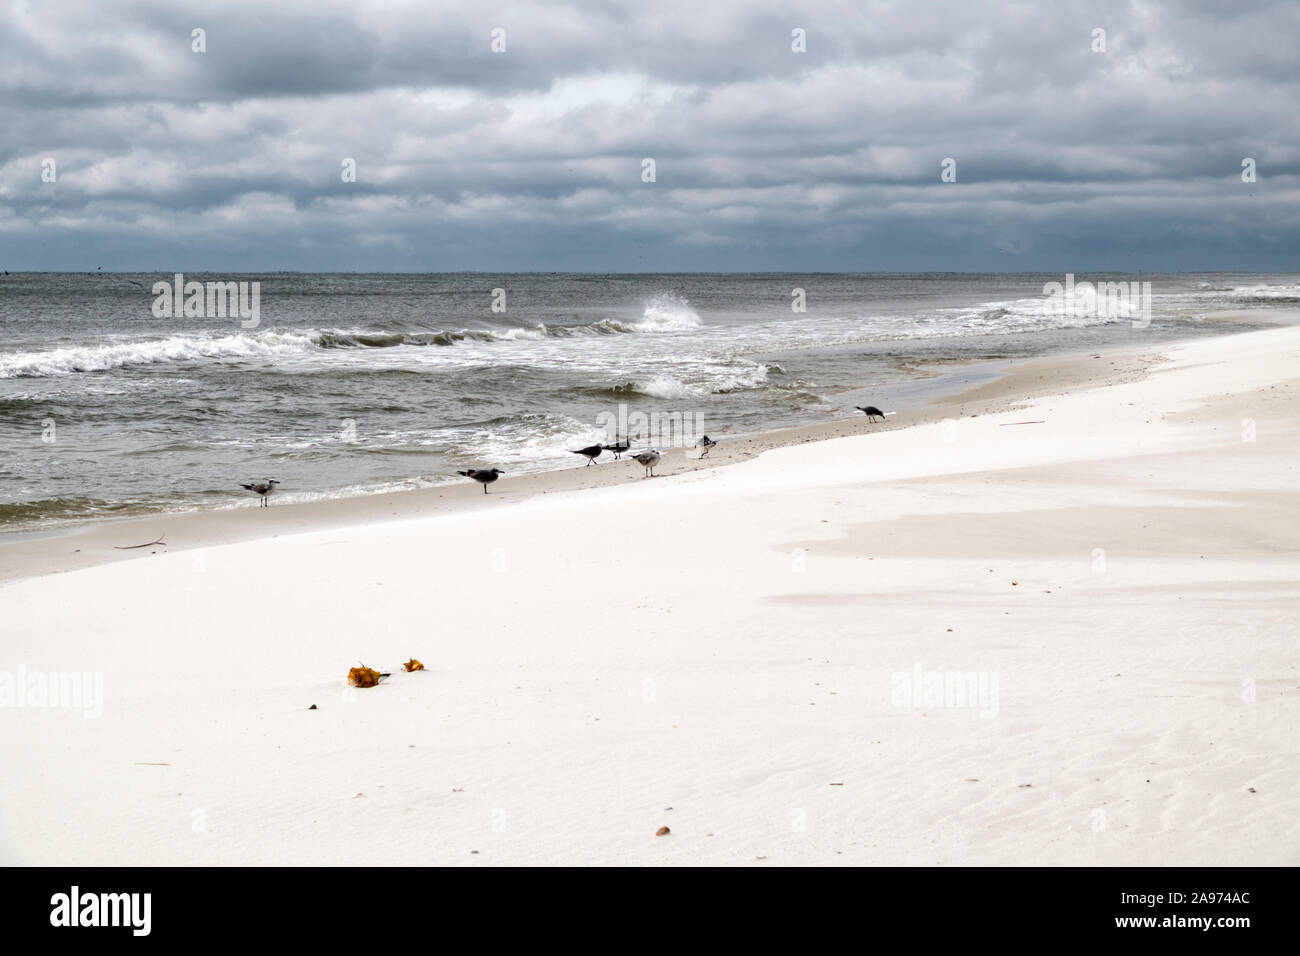 Seagulls face into the wind as a gale from the north whips the tops off incoming waves at the beach in Gulf Shores, Alabama, USA. Stock Photo